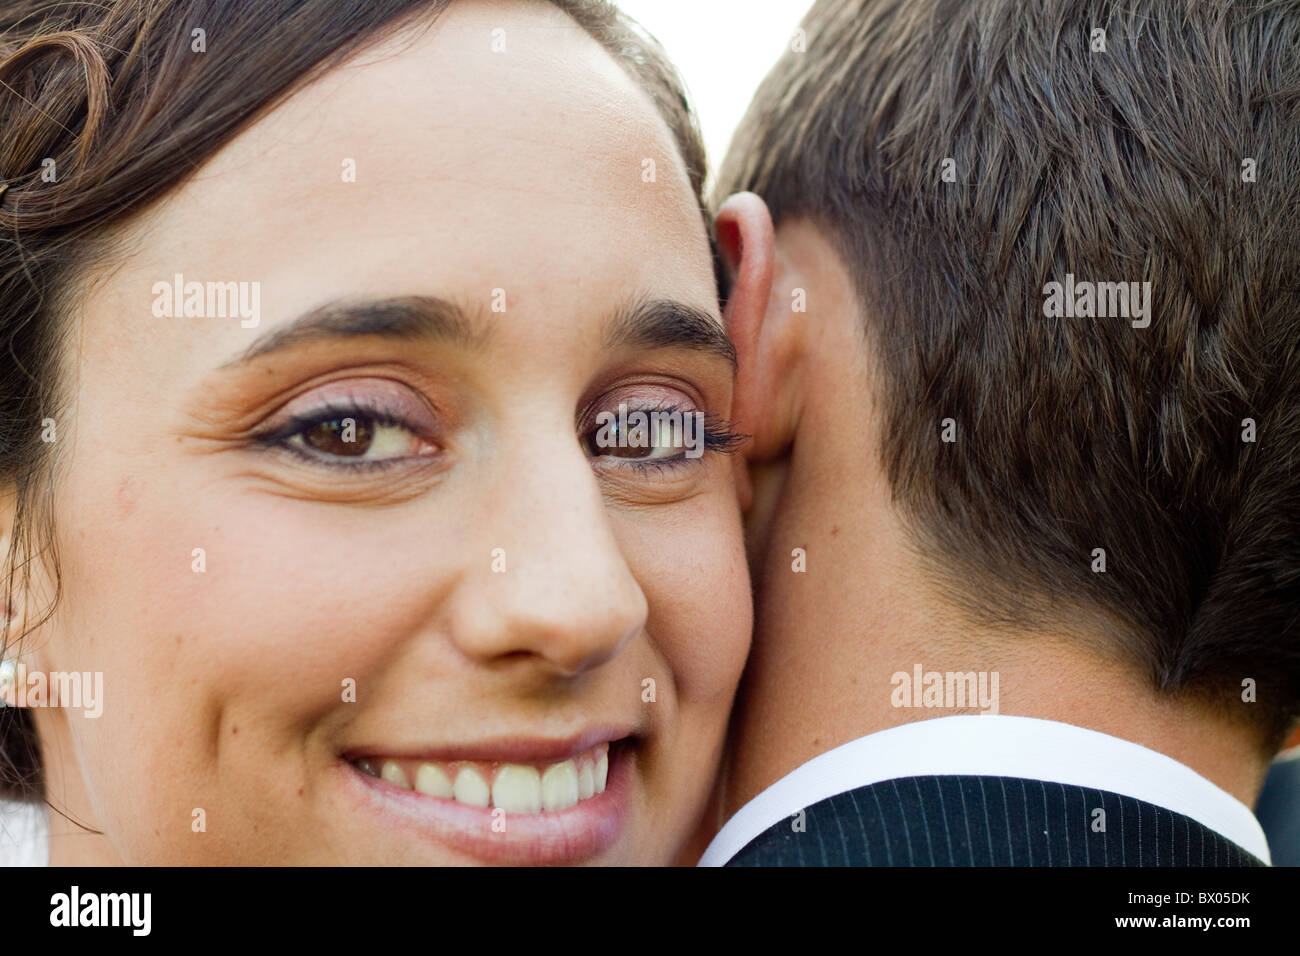 A wfe looks over her husband's shoulder as she embraces him. Stock Photo